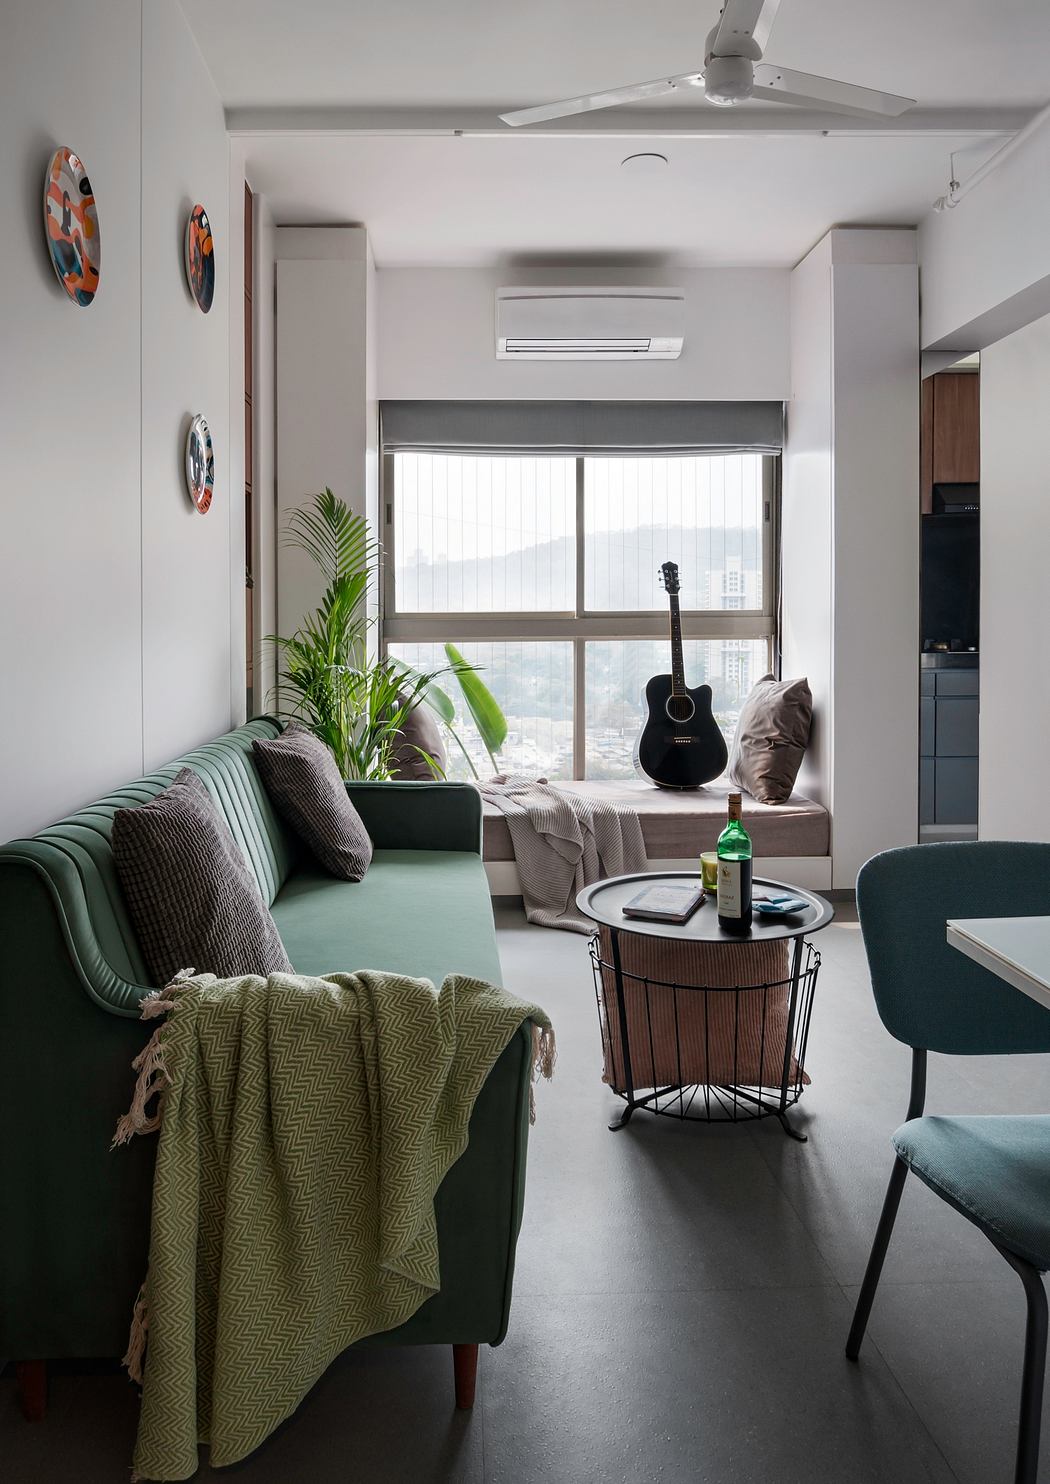 Cozy apartment with modern furnishings, large window, and acoustic guitar.